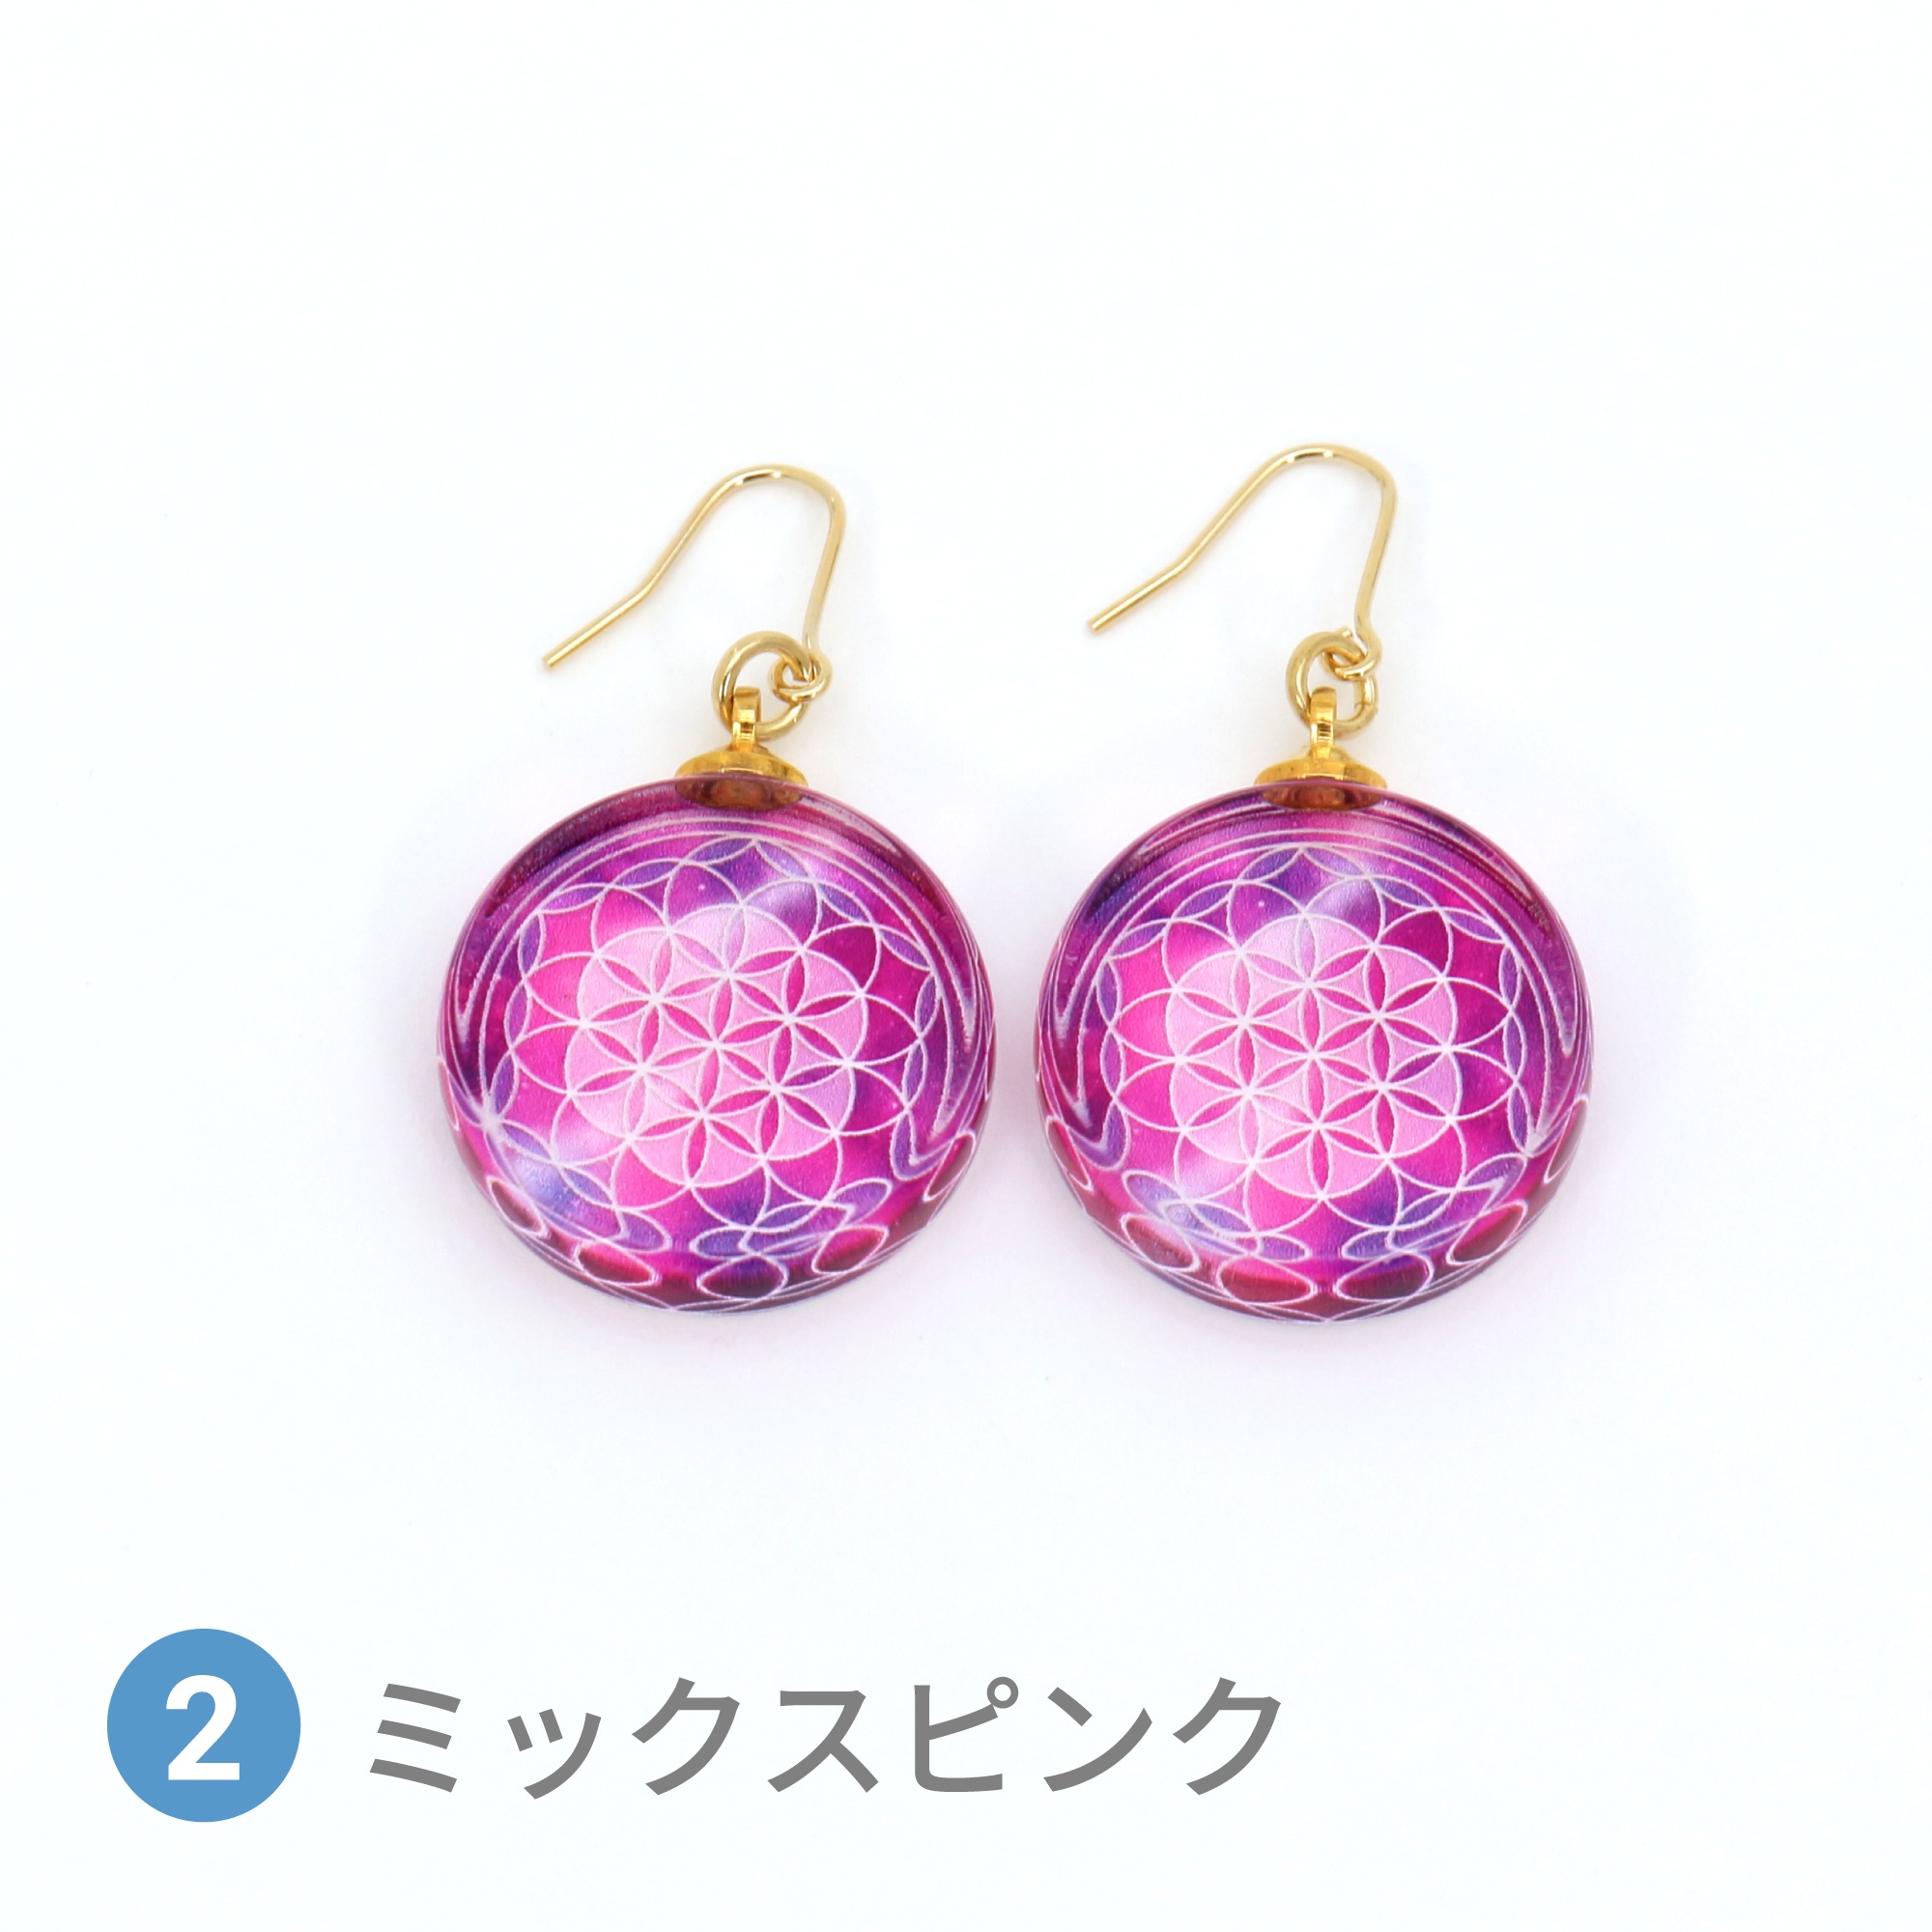 Glass accessories Pierced Earring FLOWER OF LIFE mix pink round shape